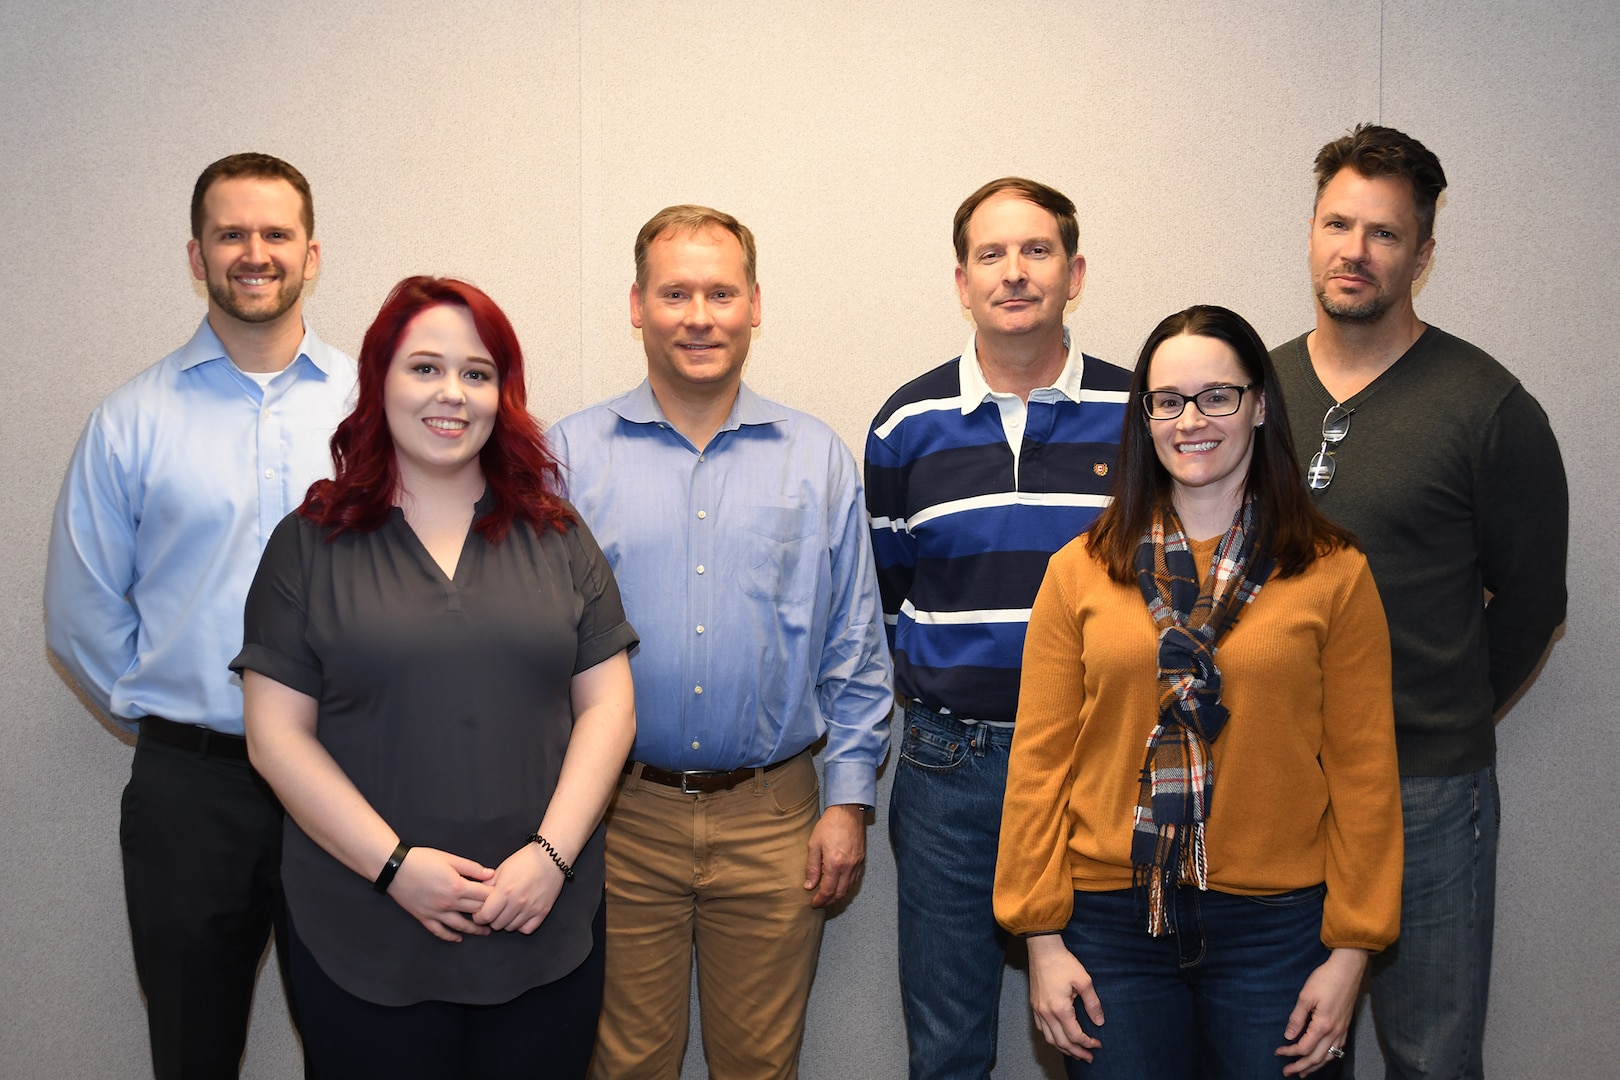 Six members of the Government Furnished Equipment Agnostic Software Team pose for a photo. The 20 member team received the Award of Merit for Group Achievement for their work to deliver quality software products for use in laser weapon systems. Team members include Teresa Berra, James Bohannon, Taylor Evelyn, David Fedorchak, Jr., Donald Fogler, Mark Glass, Kaela Gosdzinski, John Jahn, Thomas Lackert, Jr., James Latourell, Van Le, Jean Levy, Chris Meyer, Melissa Olson-Phipps, David Pritchett, Barry Ross, Eric Schroeder, Zachary Sherrod, Yong Shin, and Elliott Sperlazza. Pictured: FRONT ROW (left to right): Kaela Gosdzinski, Melissa Olson-Phipps BACK ROW (left to right): Eric Schroeder, Mark Glass, Jim Latourell, David Fedorchak Jr.